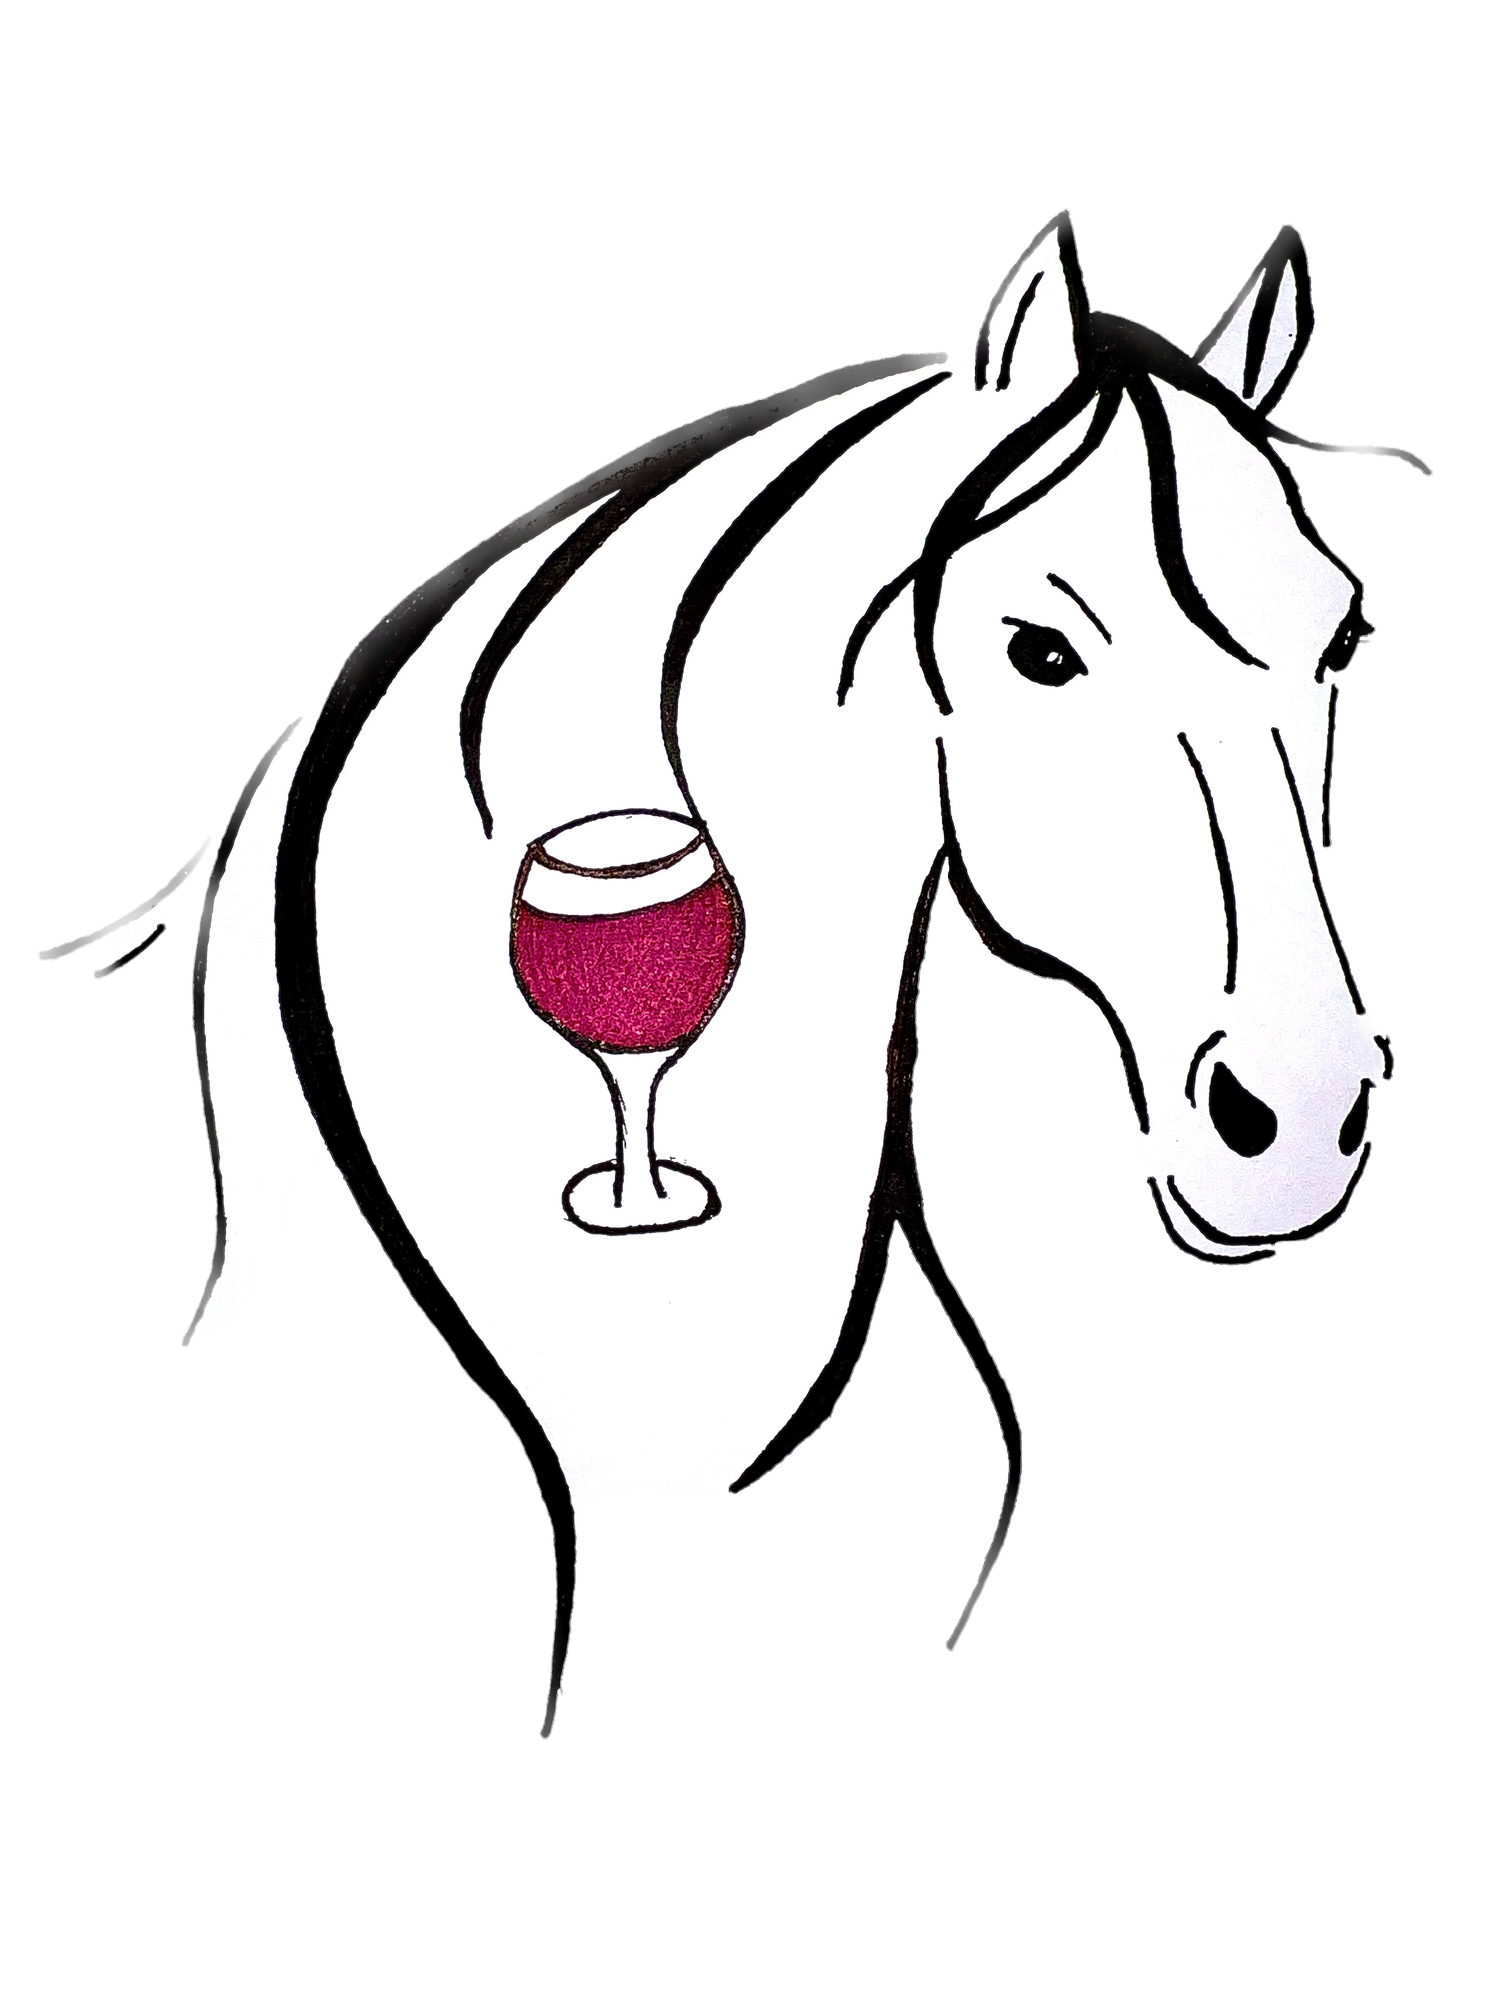 Equines and Wine